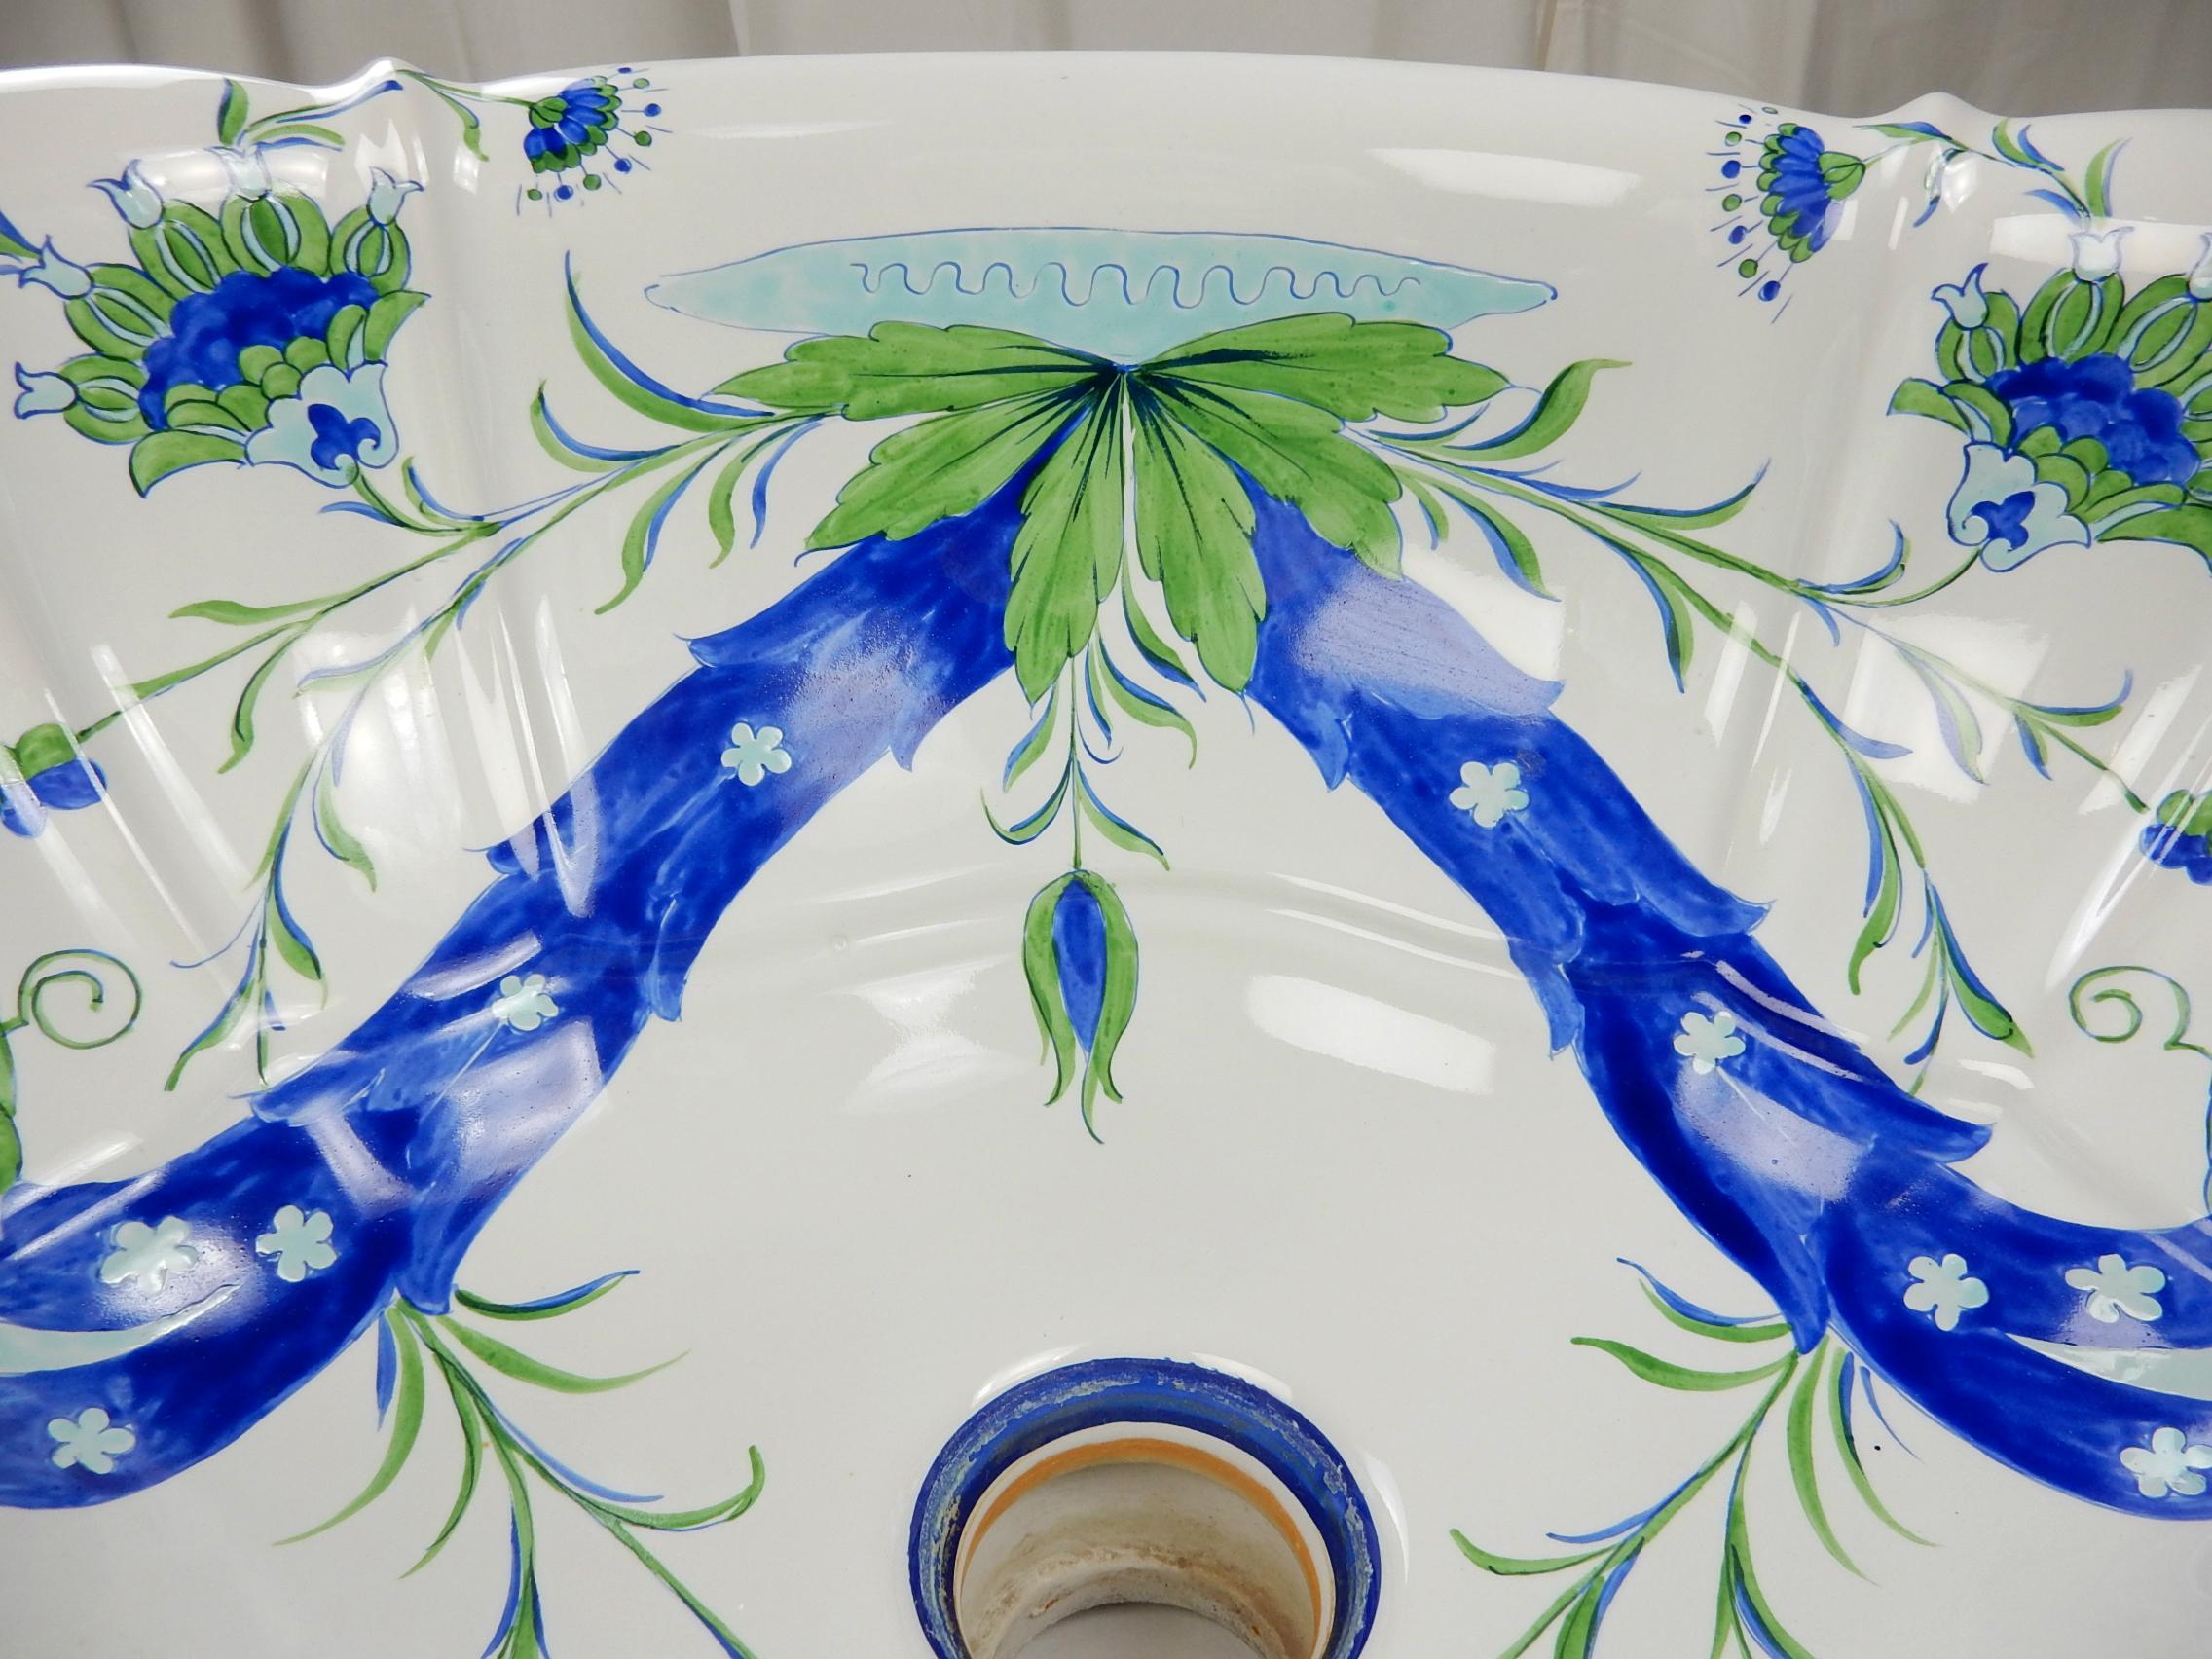 Baroque Revival Italian Bathroom Basin Sink from Sherle Wagner Collection, circa 1960s